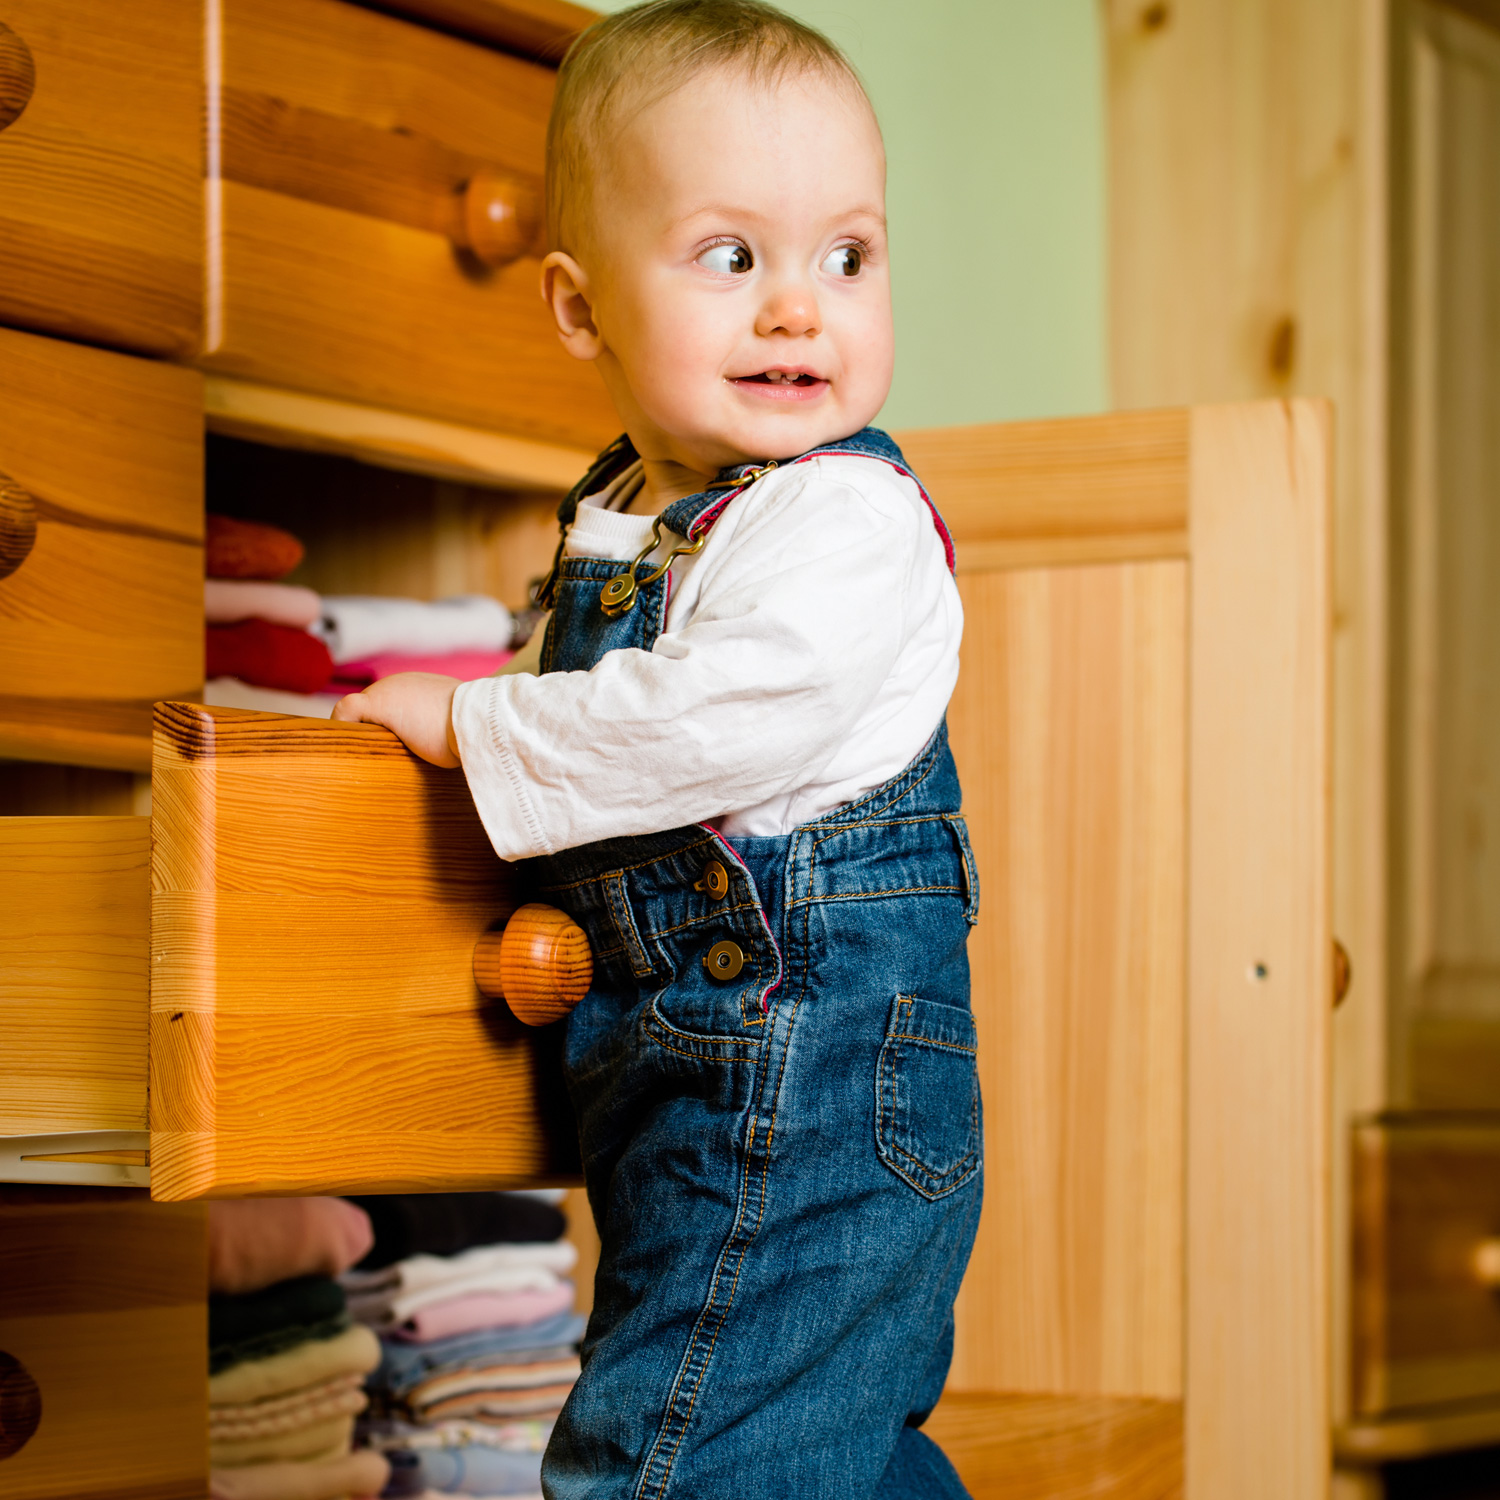 Expert-proven tips to help toddlers learn new words.